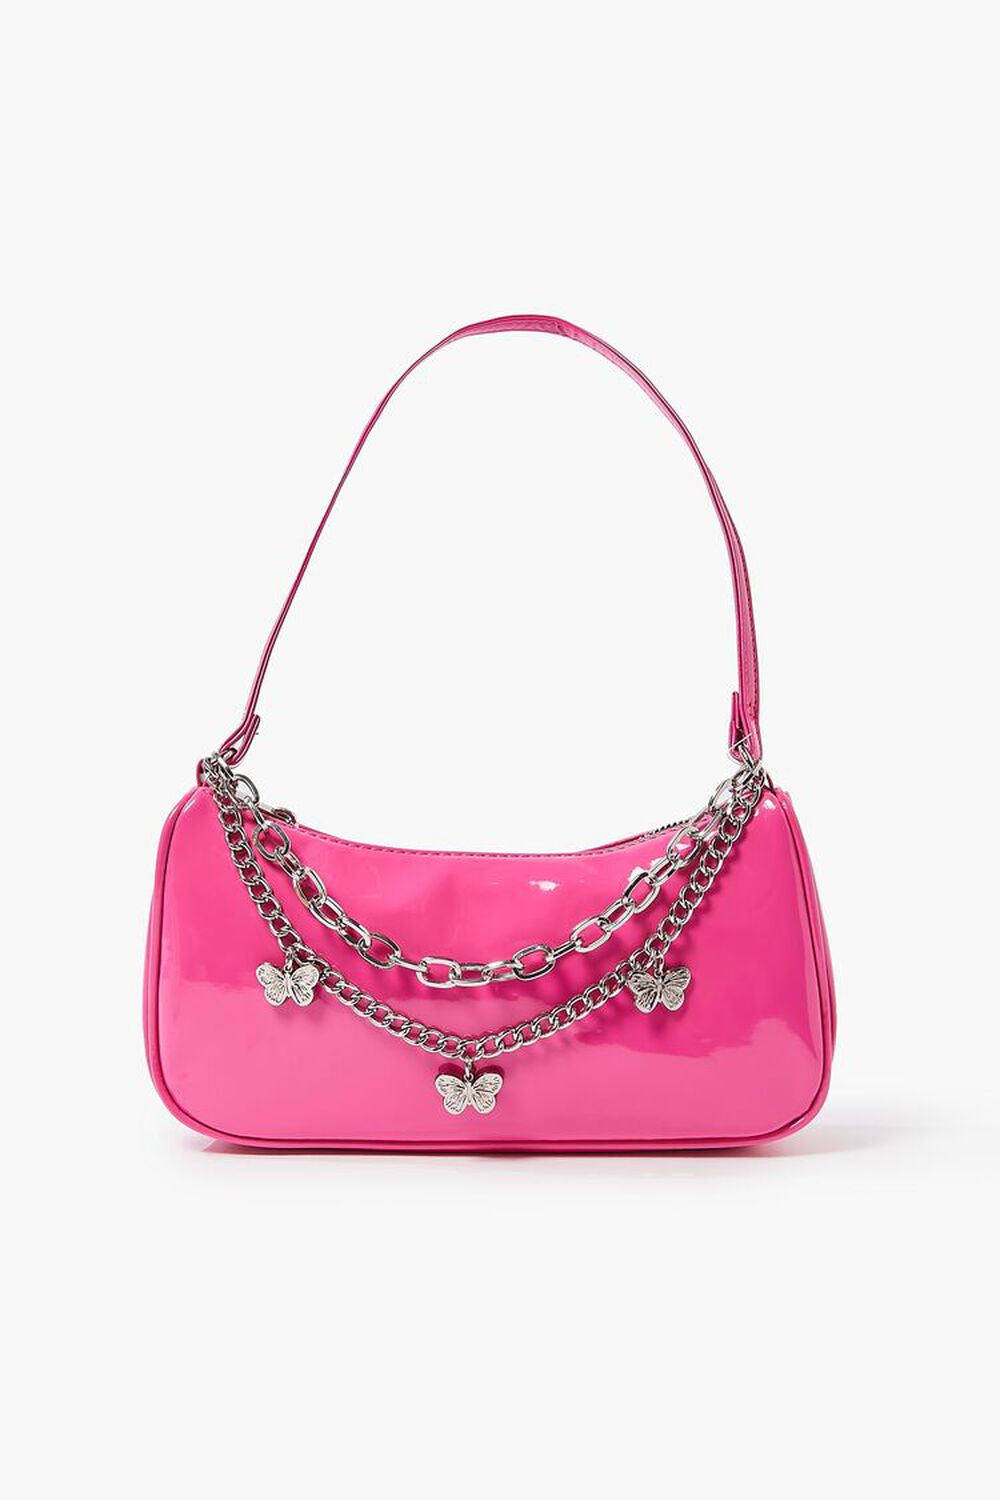 PINK Butterfly Charm Chain Shoulder Bag, image 1